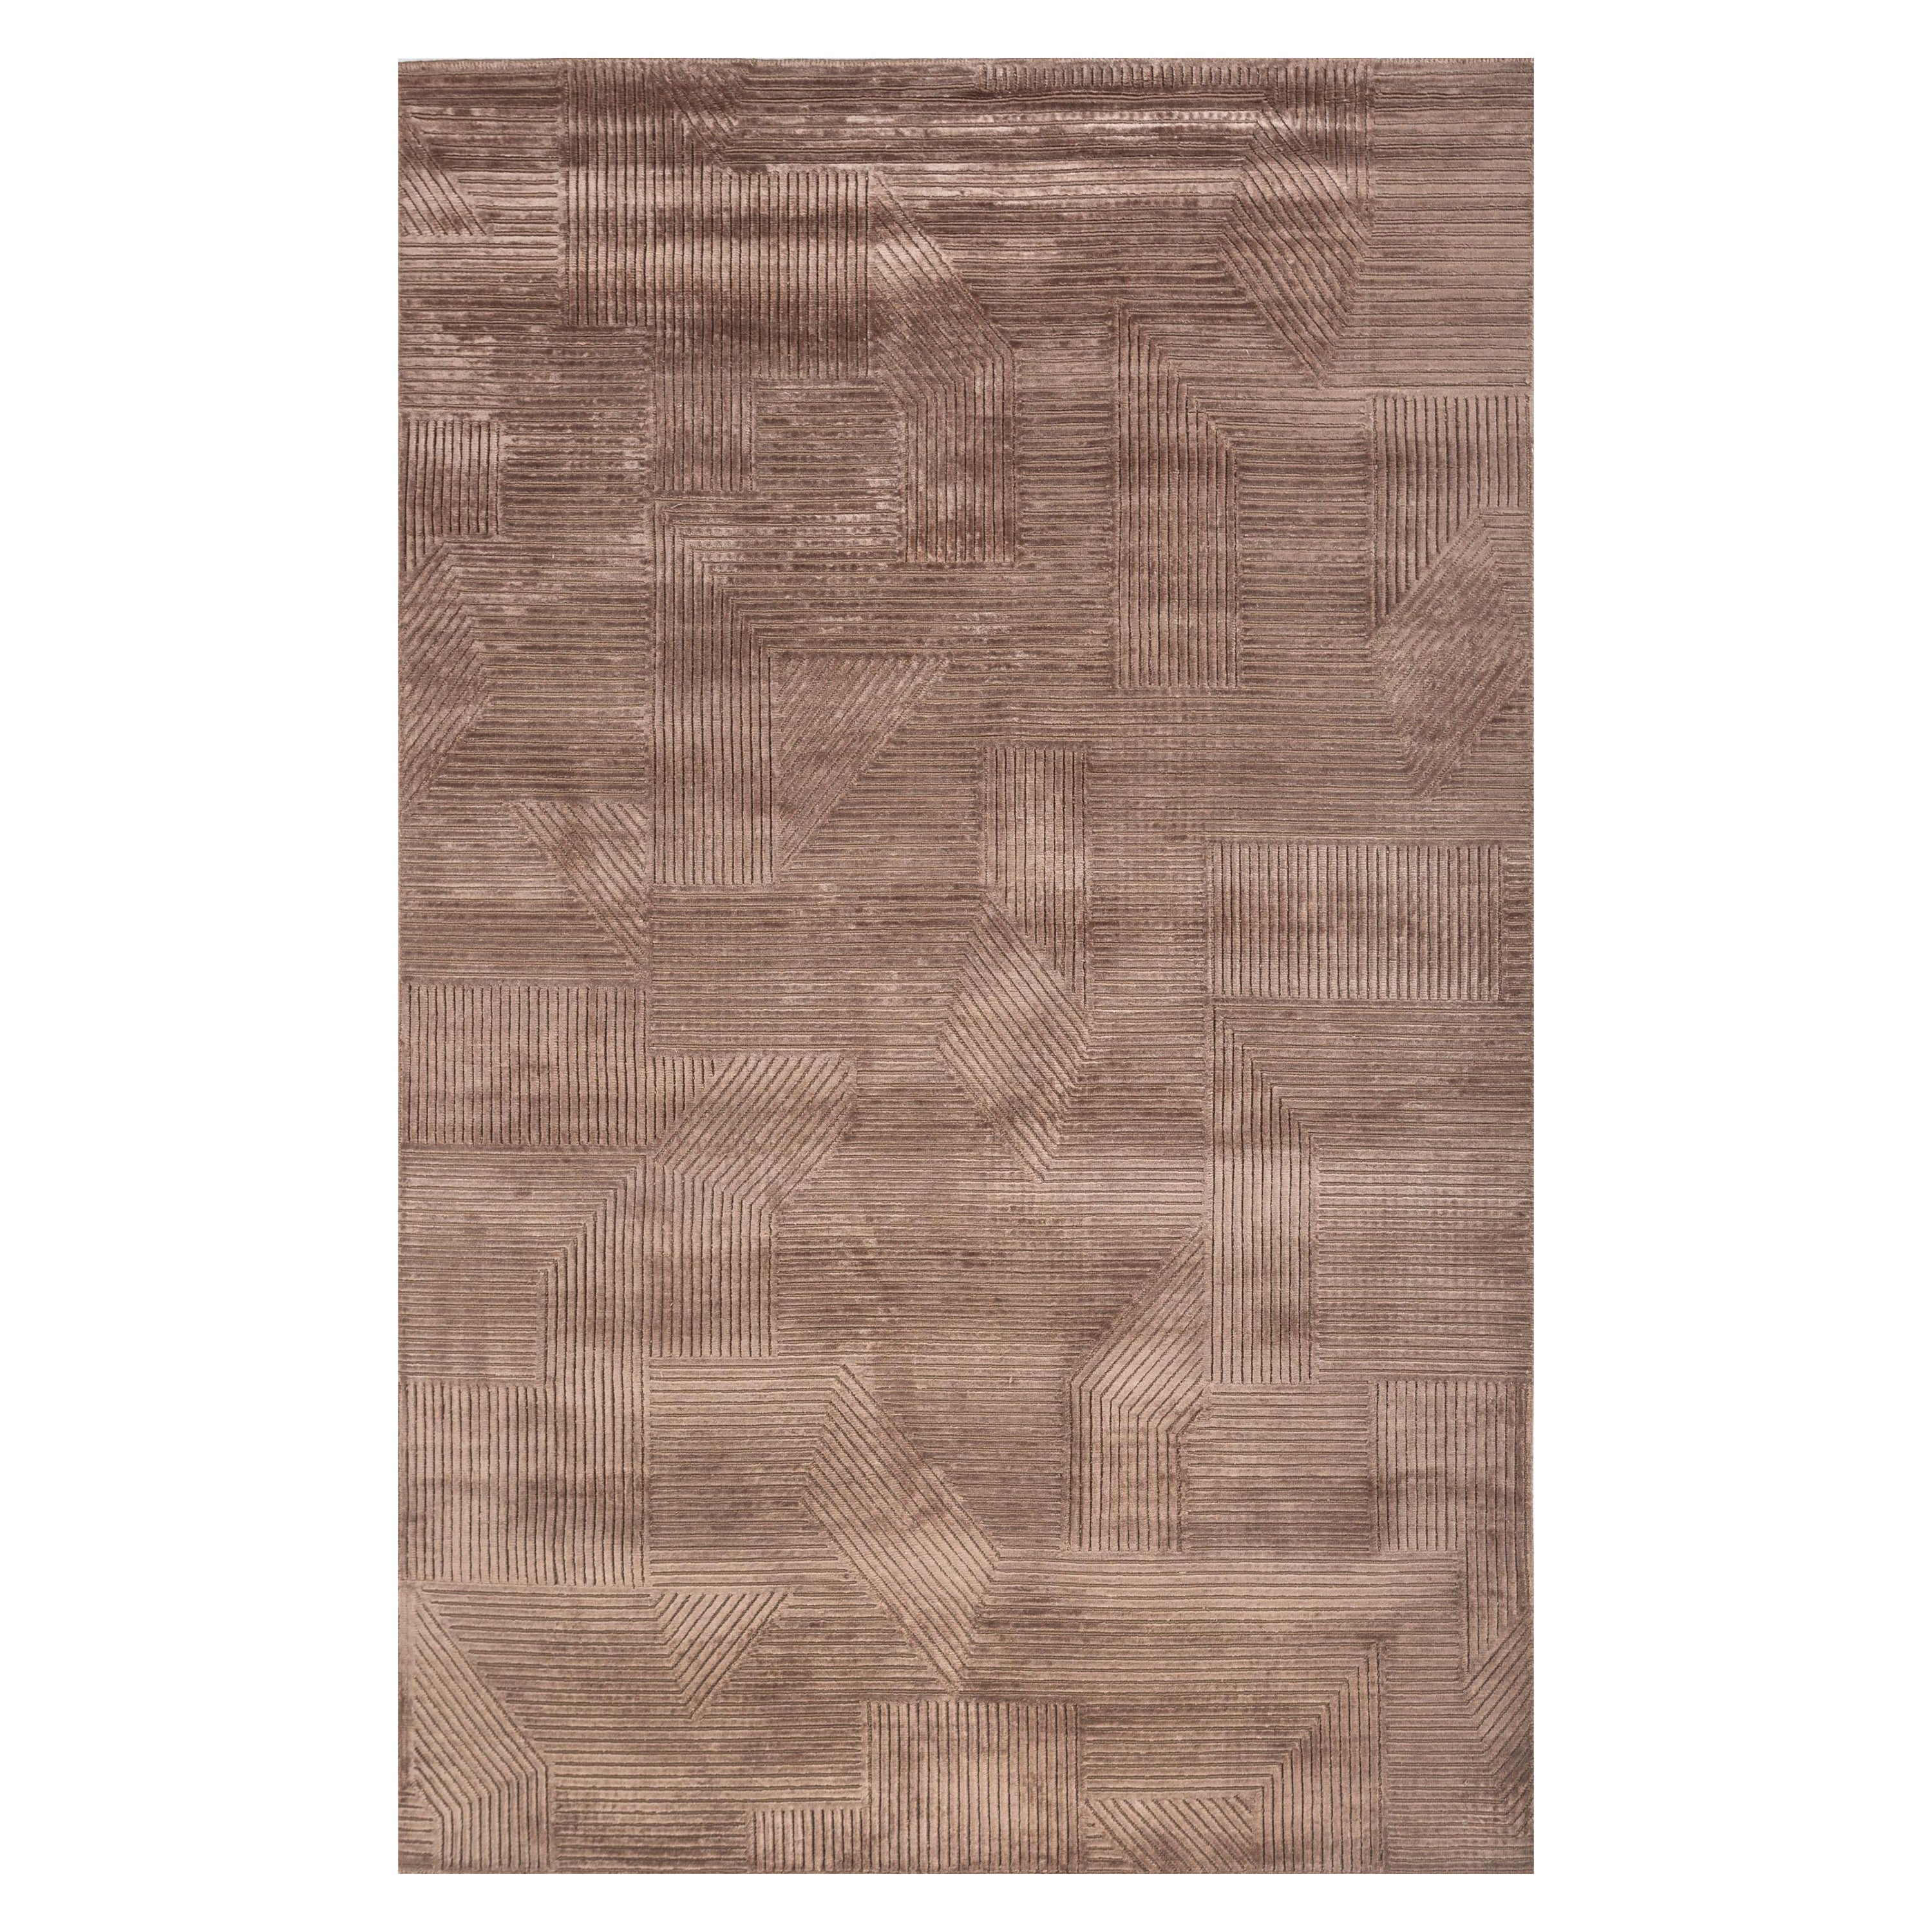 Tonal Bliss Natural Brown & Tawny Brown 180X270 cm Handknotted Rug